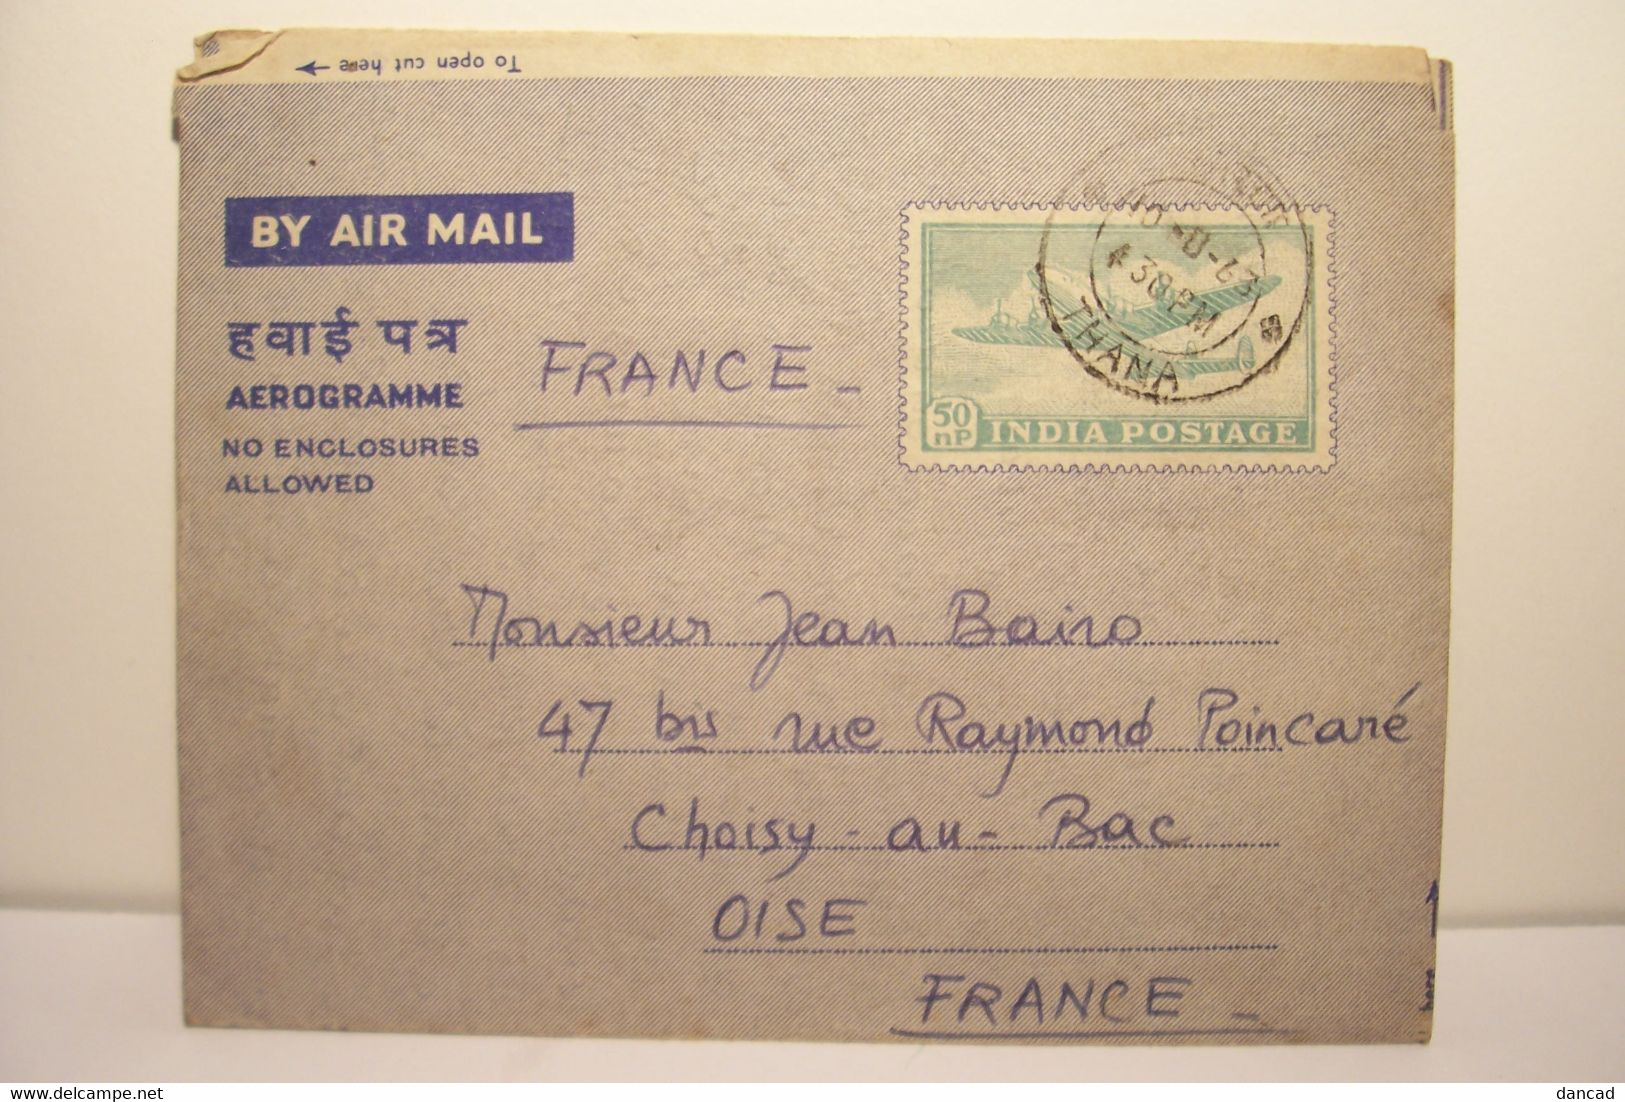 INDIA  POSTAGE  50 NP  - AERORRAMME   - BY AIR MAIL - - Buste